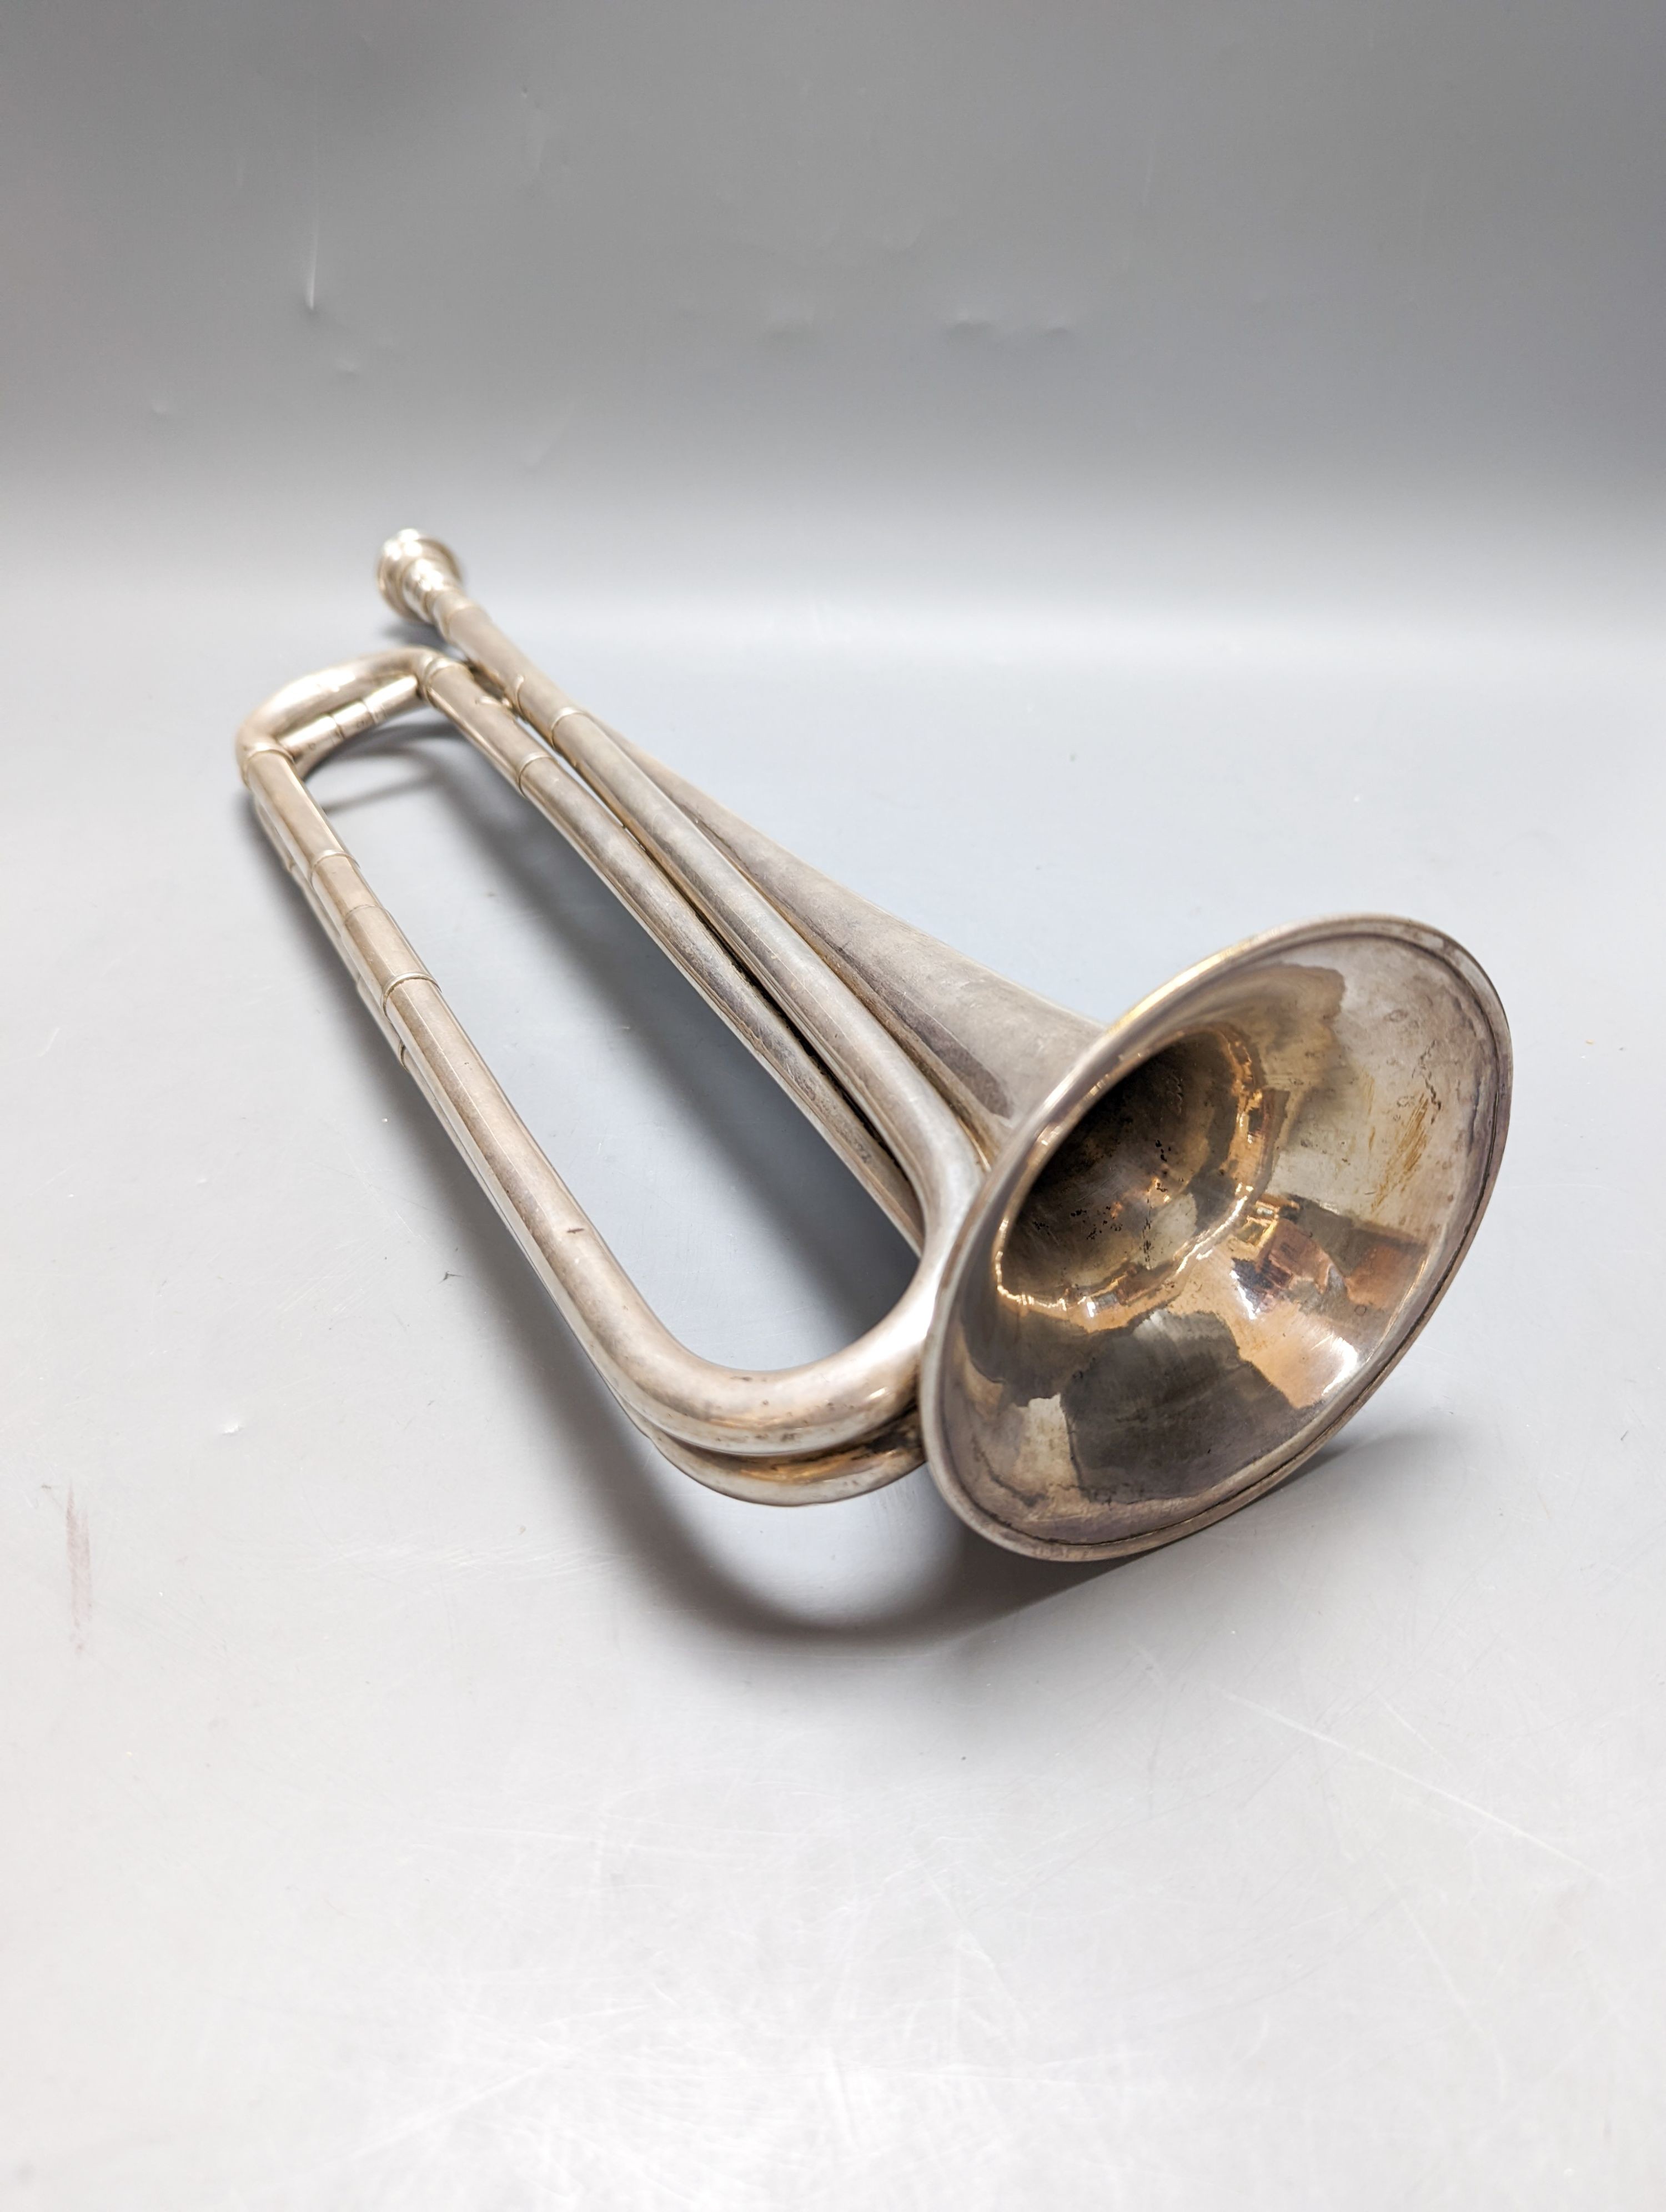 A Rudall Carte & Co manufacturers 23 Berners Street Oxford Street London No.4084 military bugle or cavalry trumpet, 43cm